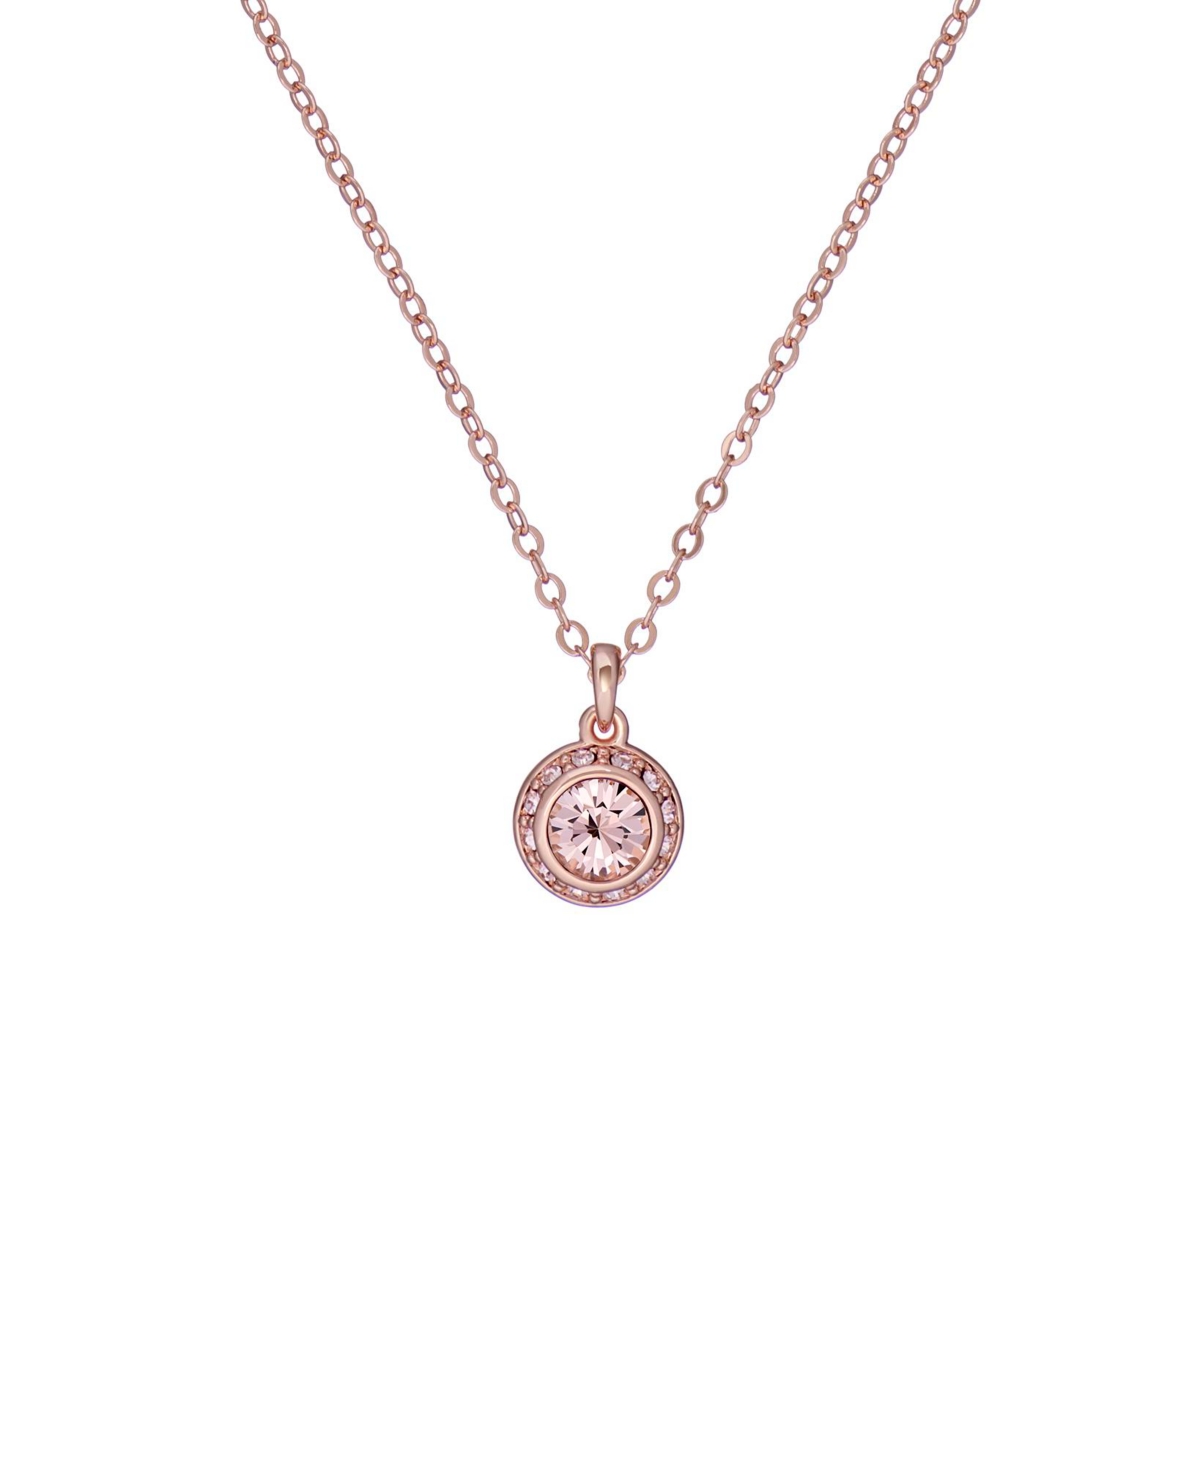 Soltell: Solitaire Sparkle Crystal Pendant Necklace - Rose gold